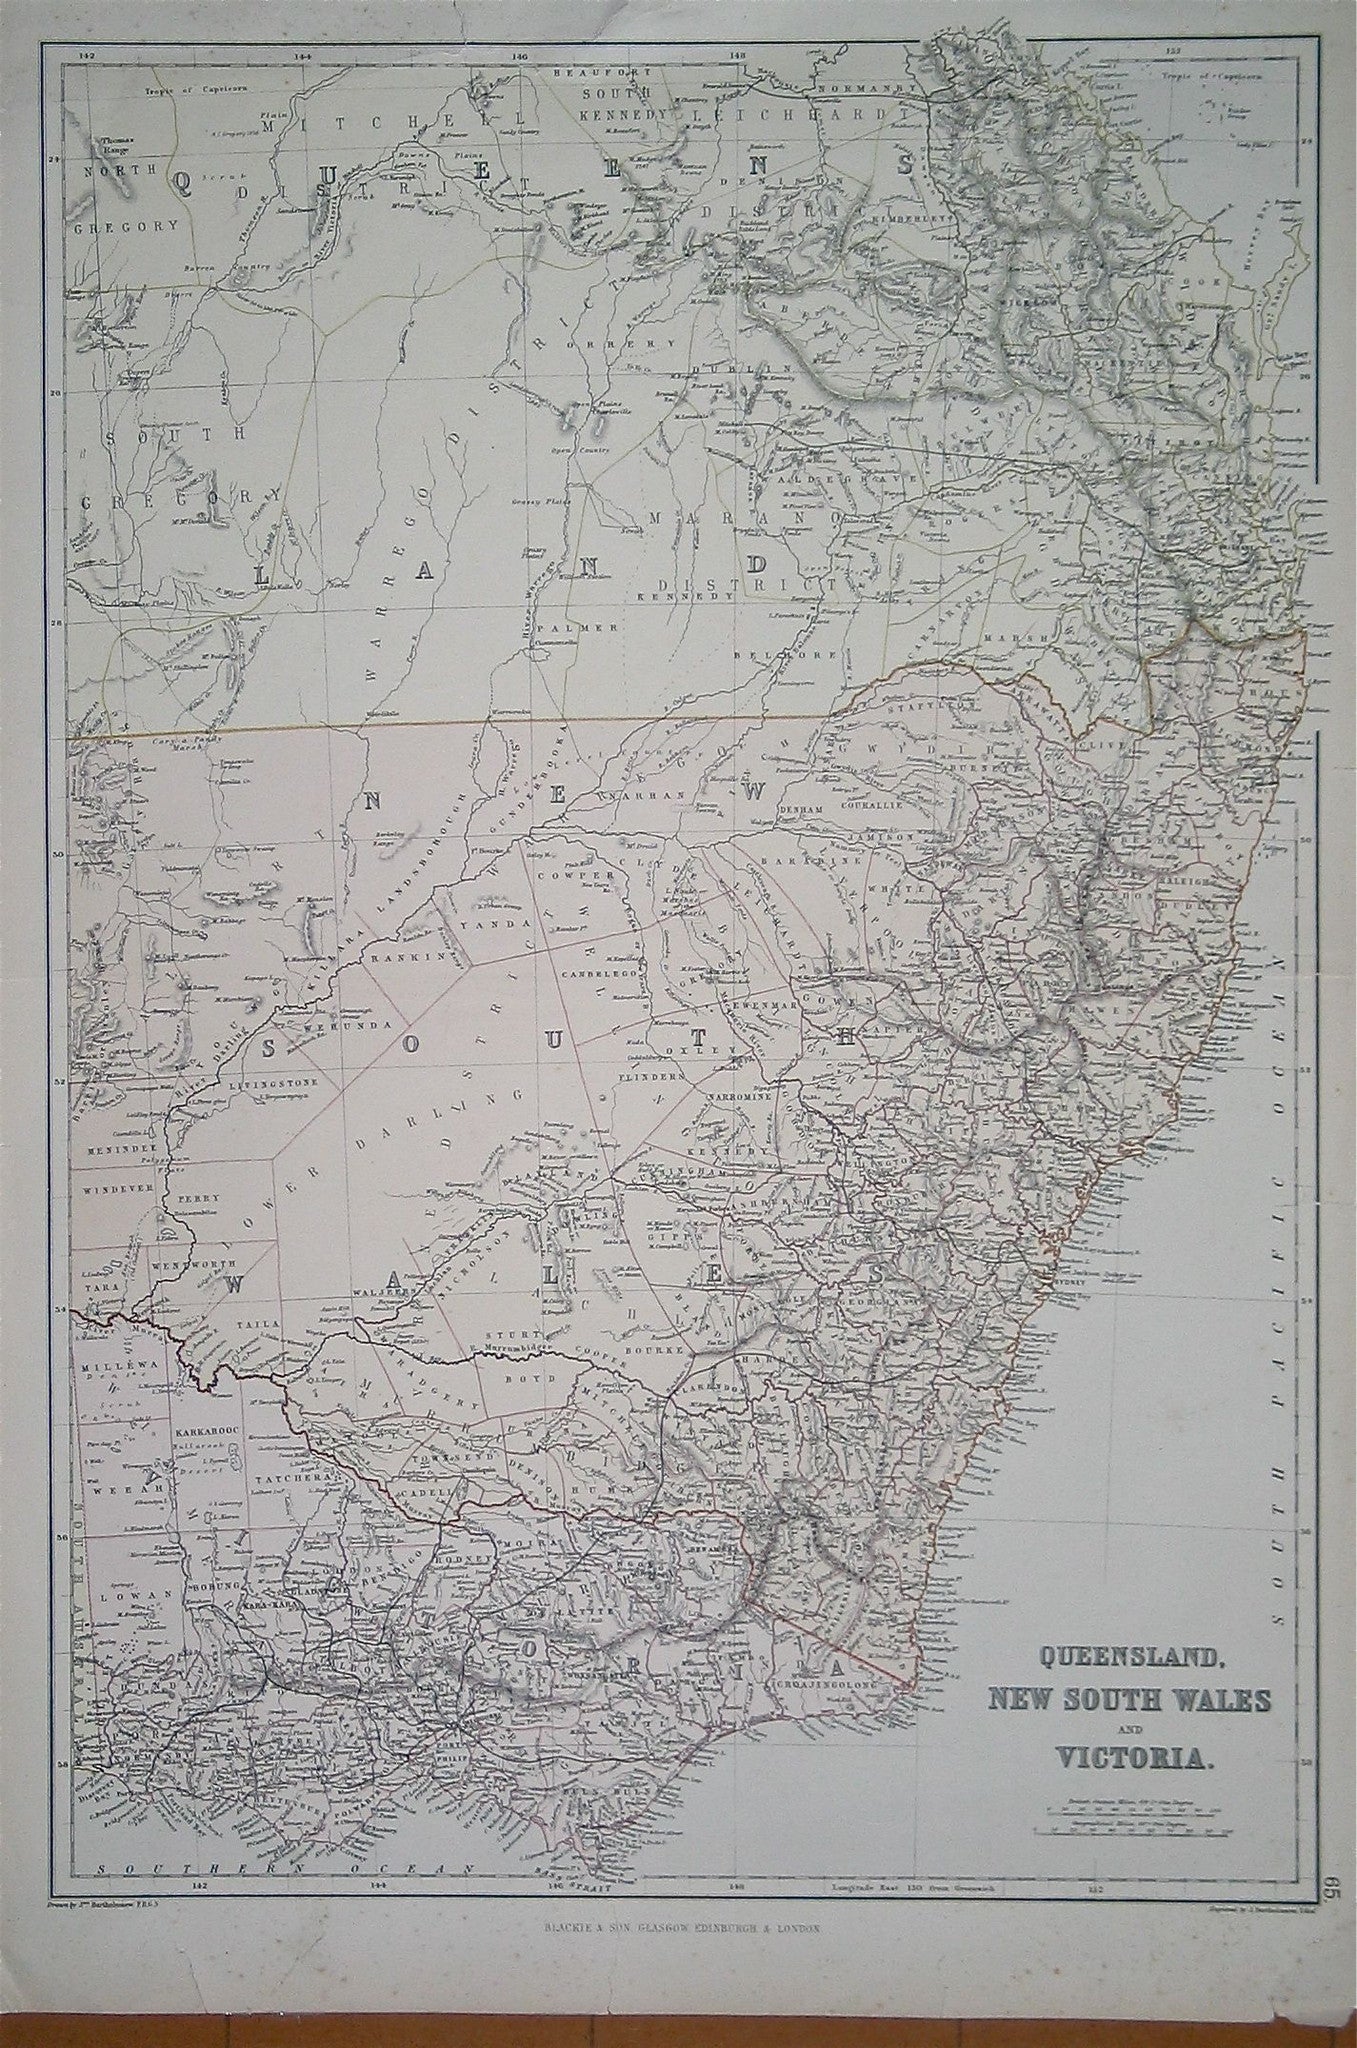 Map of Queensland, New South Wales and Victoria